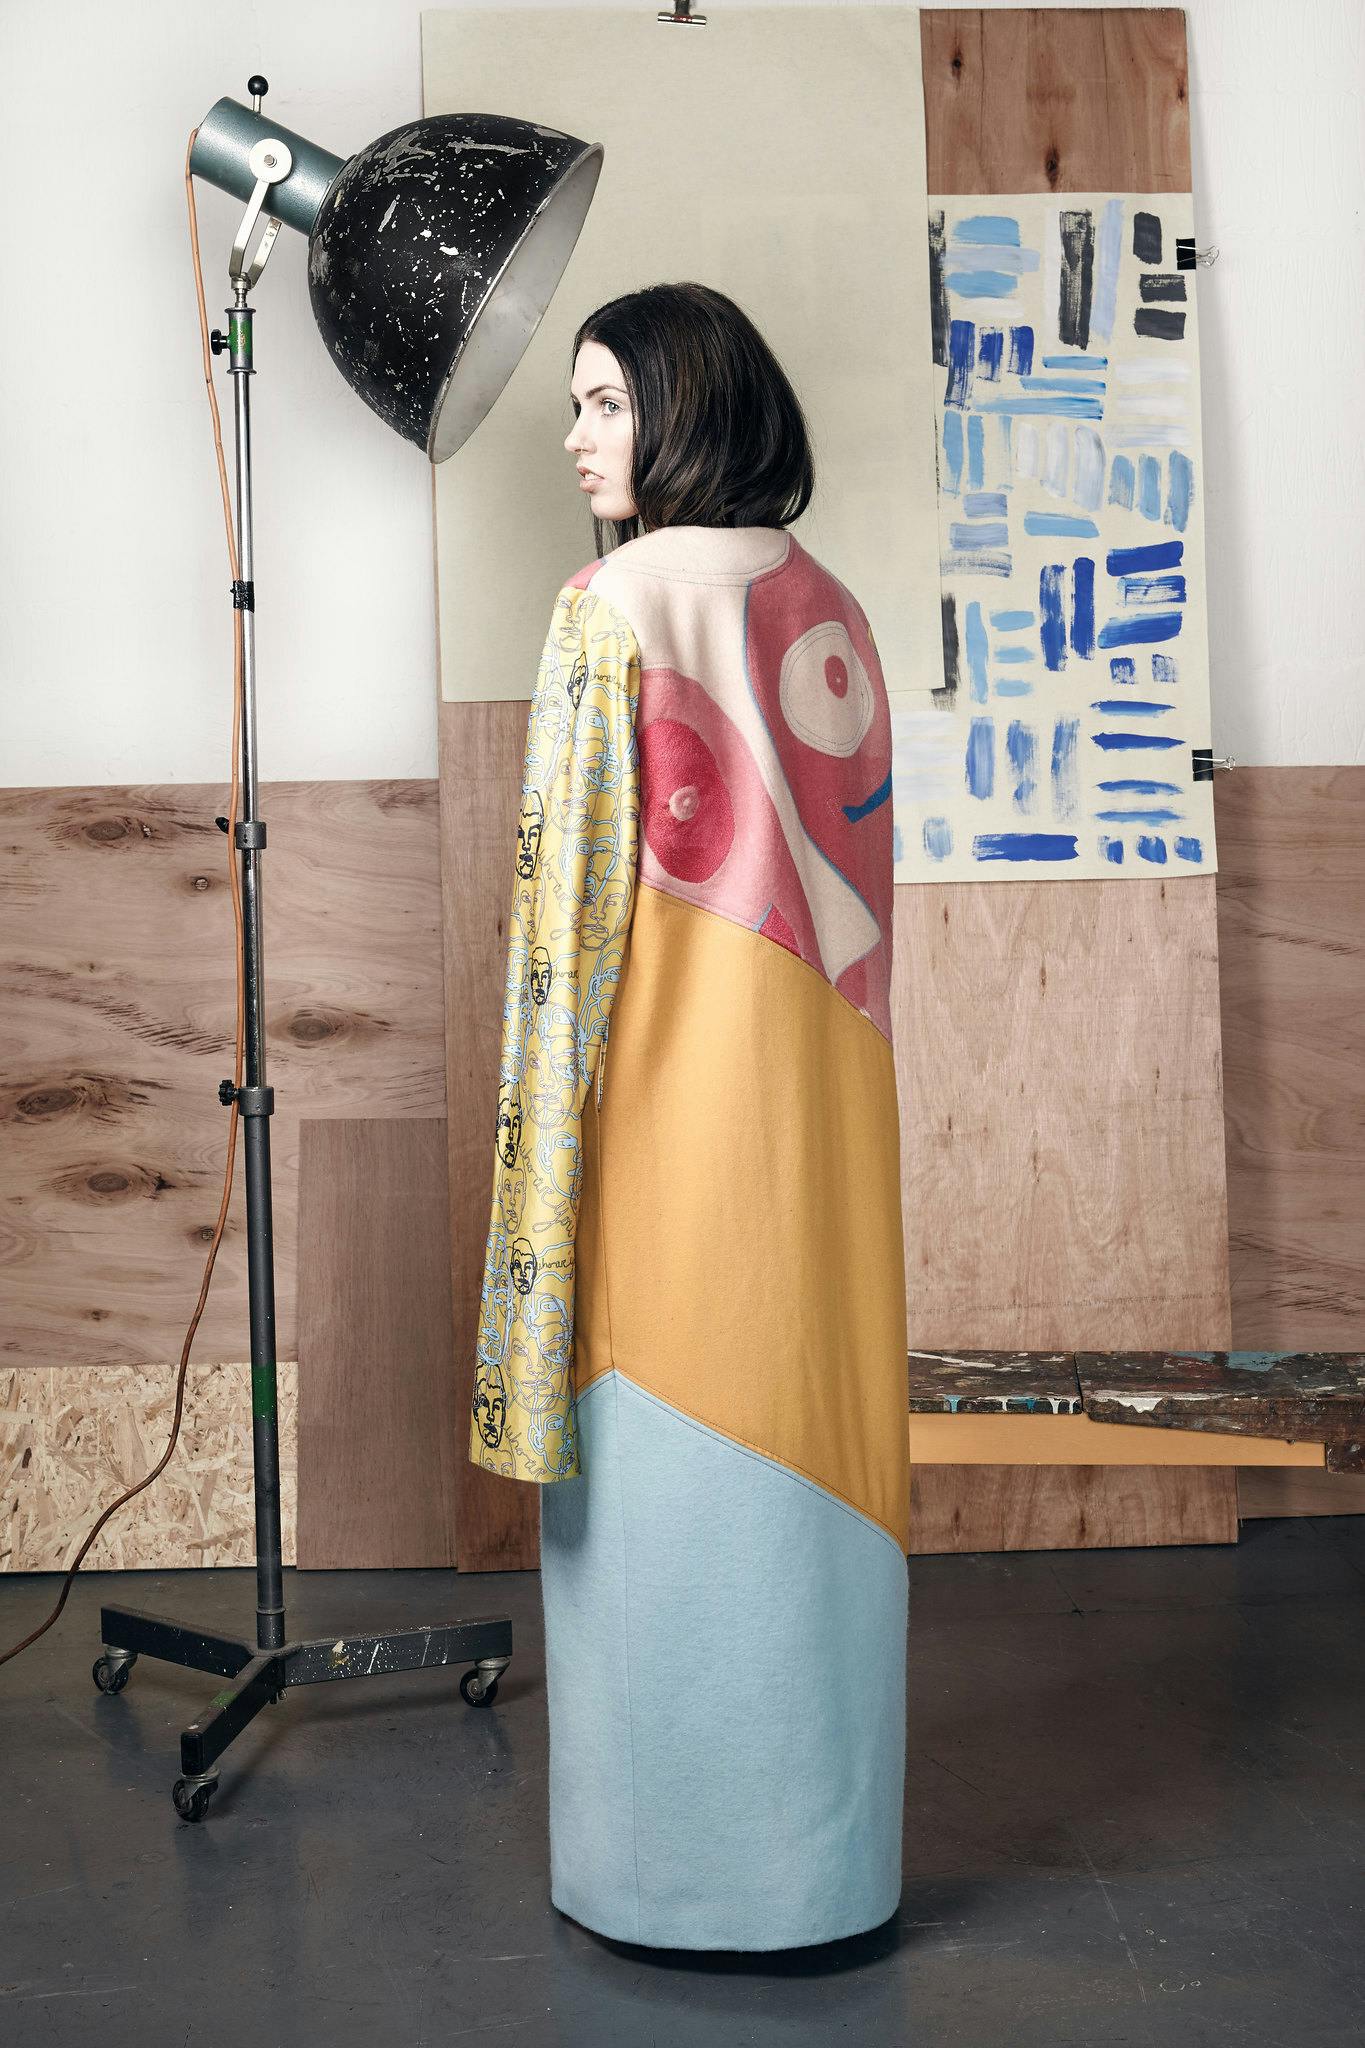 Poppy Yeoman's design from her 2016 graduation show. A female model with a sleek black bob, wears a long gown with yellow and blue panels. She is facing away from the camera, the top panel of the gown features a face-like design with patterned sleeves.